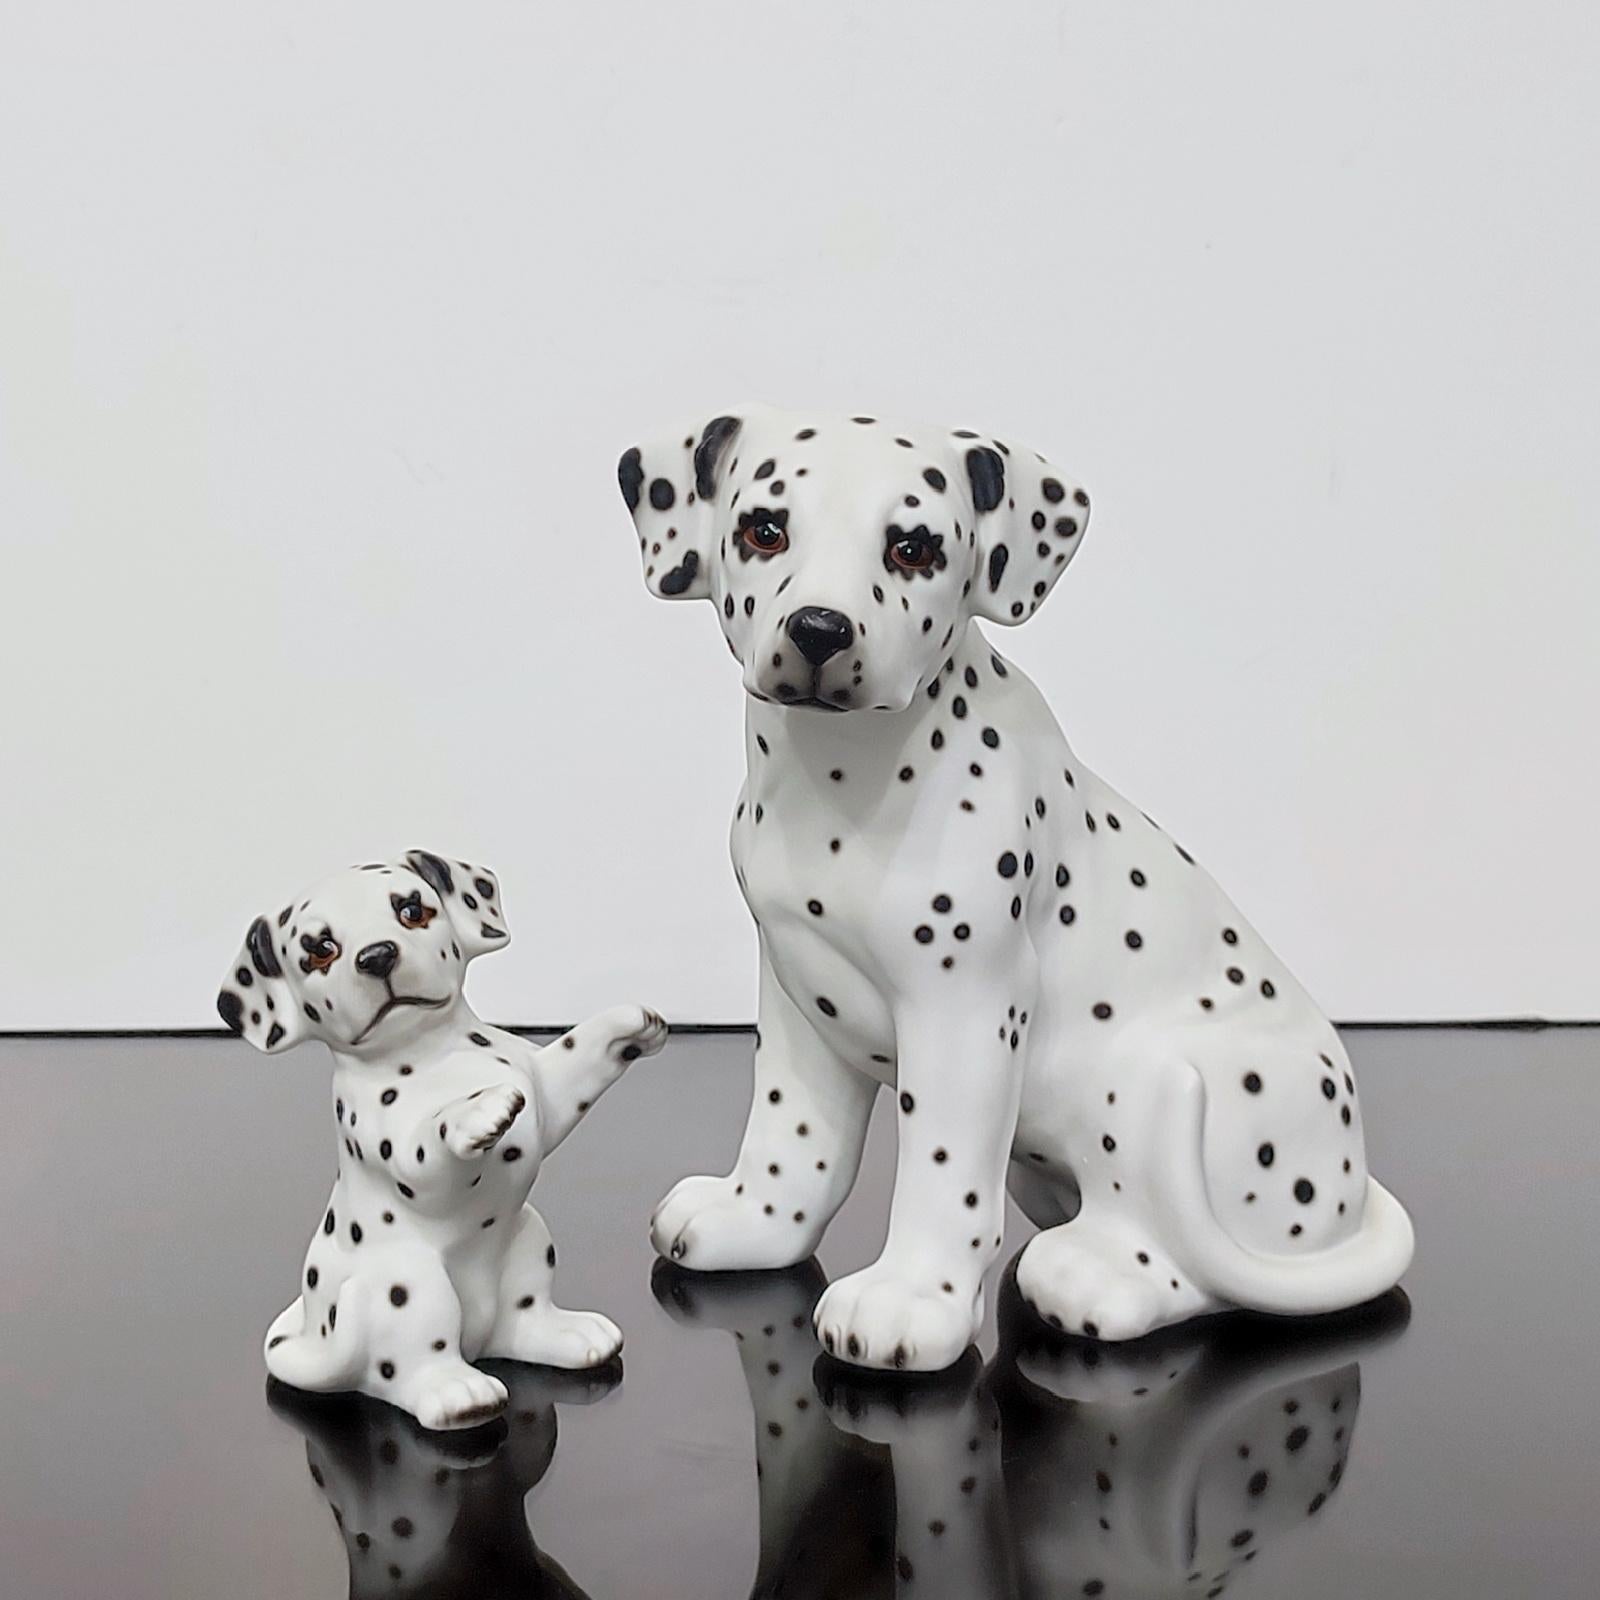 Gorgeous Dalmatian dog with its puppy, hand-painted porcelain figurines. 
Hand made and hand painted. Glass eyes. Marked on the bottom with maker's mark and impressed form number.

Dimensions:
big 15 x 11 x 17.5 cm 
small 6 x 6 x 9.5 cm
Very